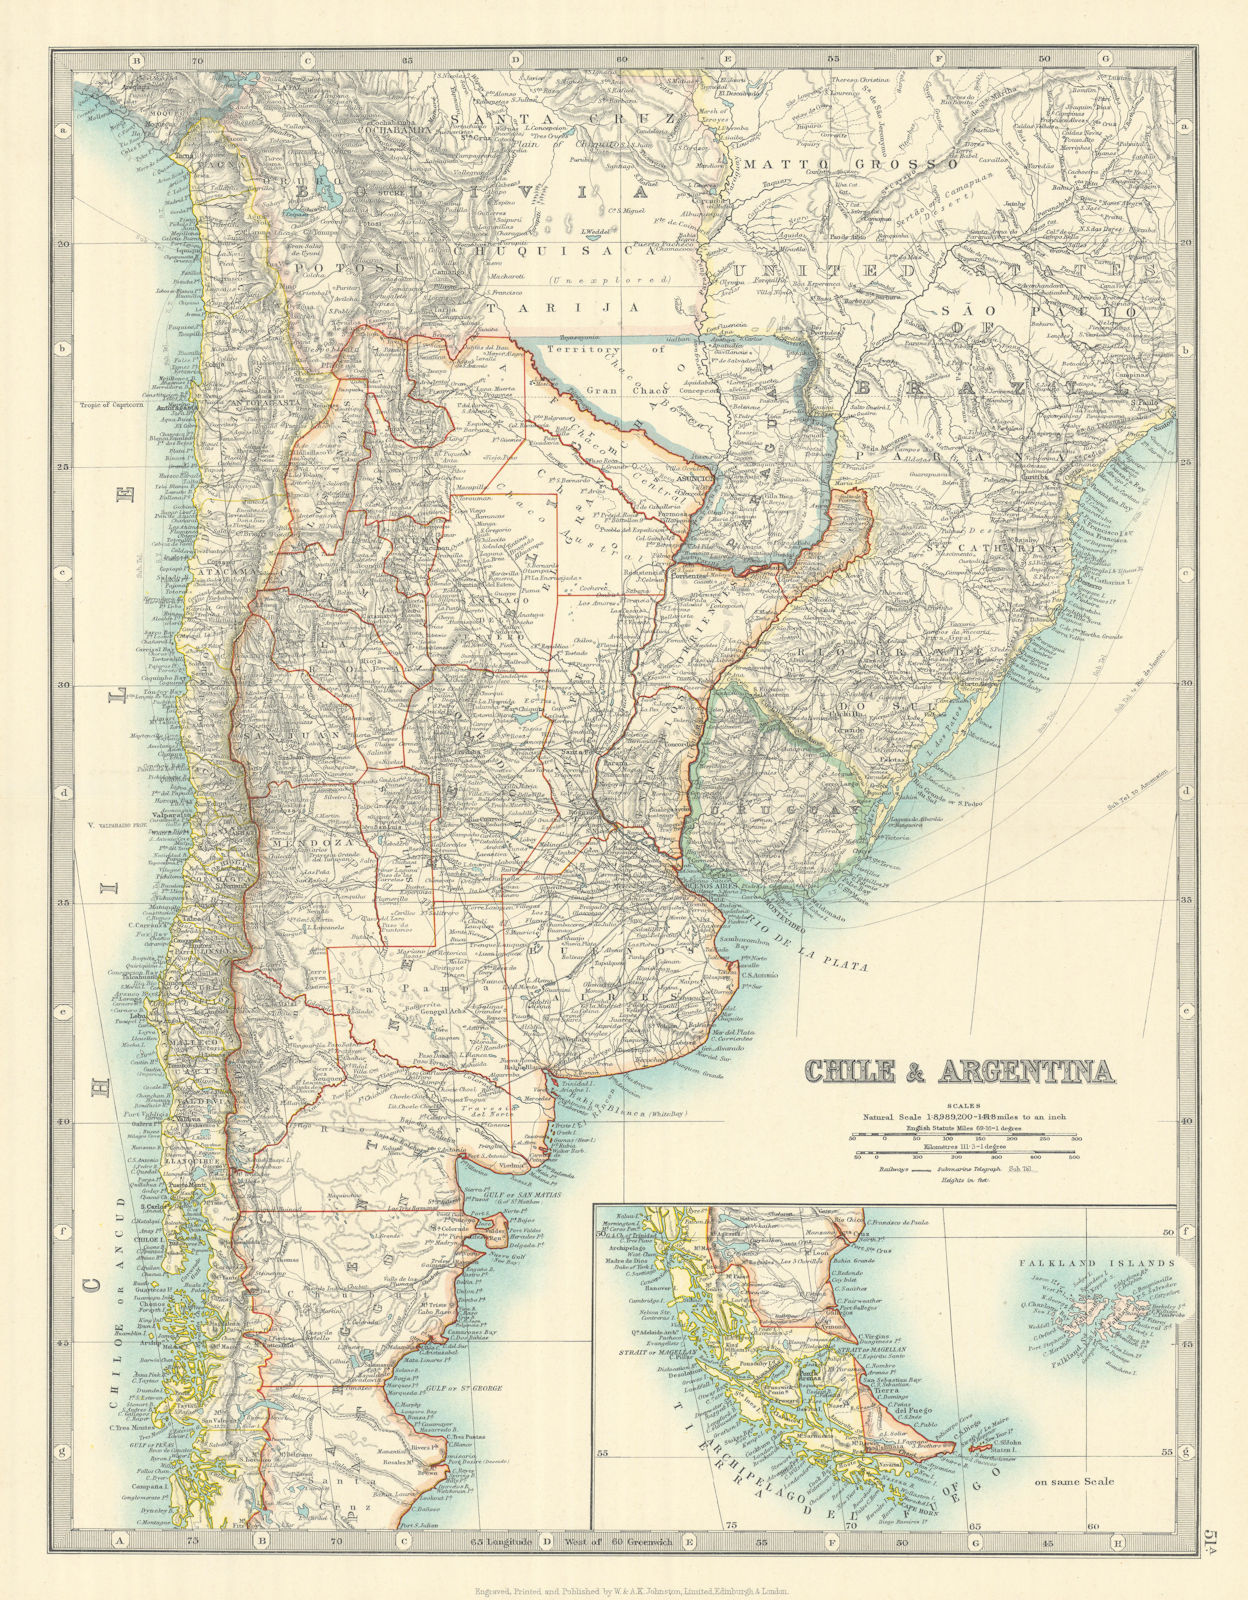 Associate Product CHILE & ARGENTINA. Paraguay including Gran Chaco. Uruguay. JOHNSTON 1913 map